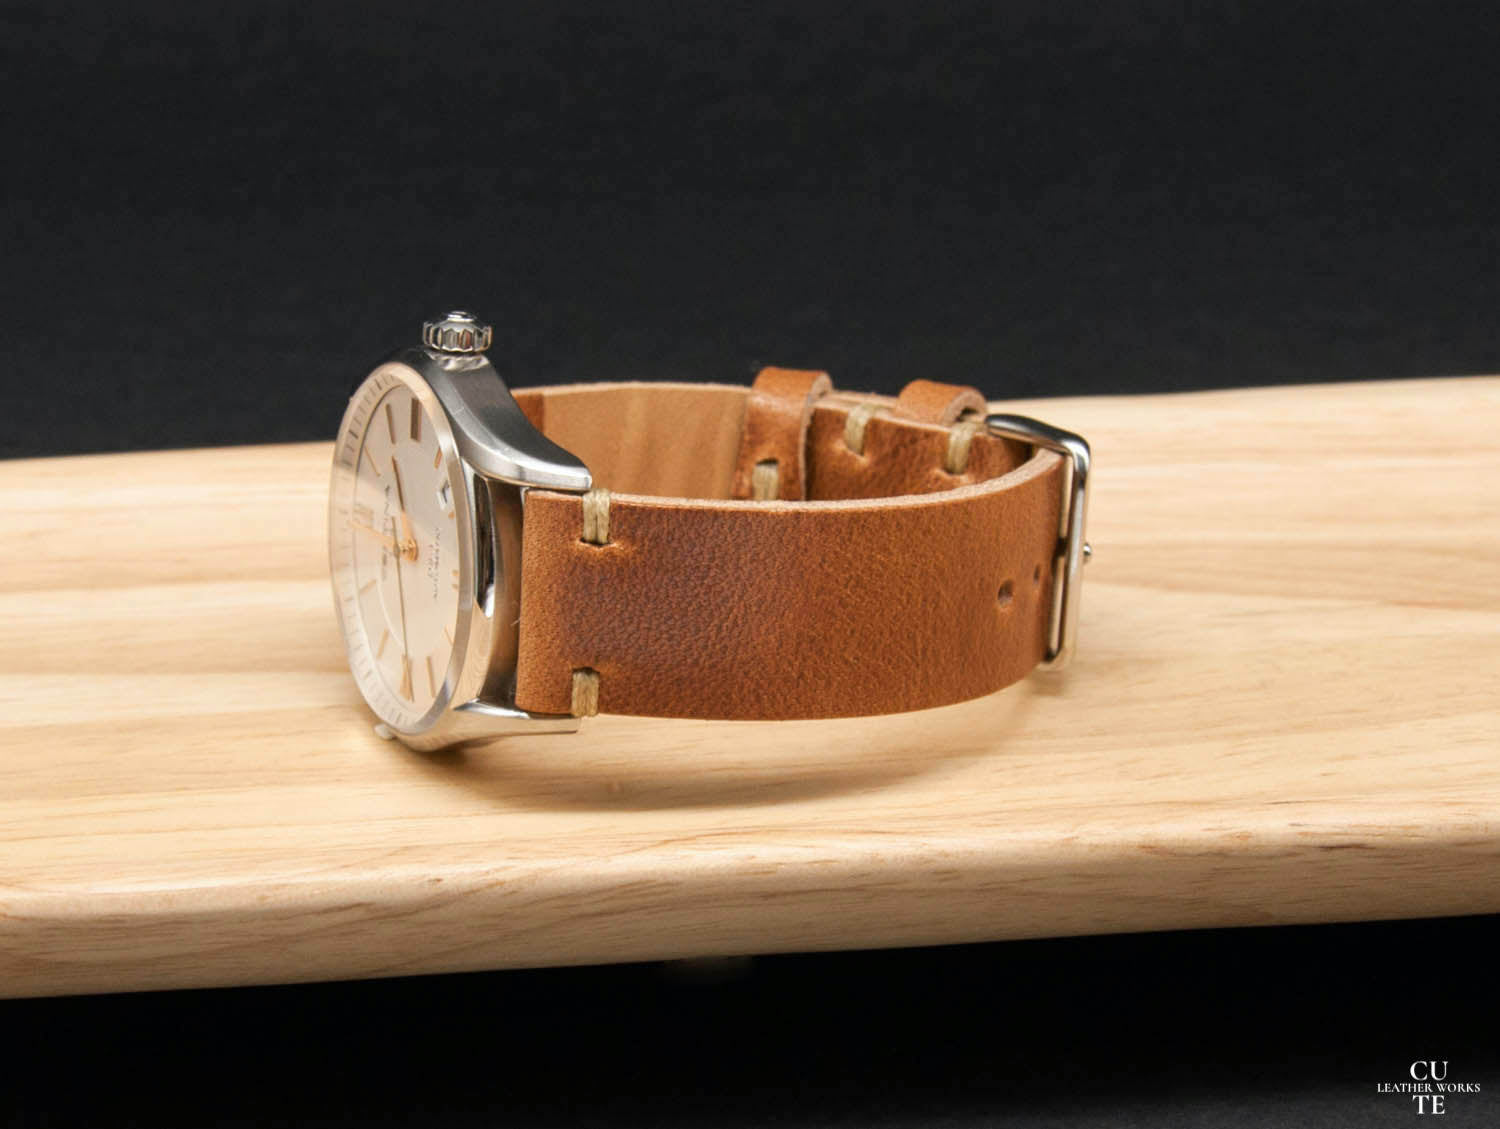 Horween Dublin Natural leather watch strap, Hand-made in Finland, With Lining